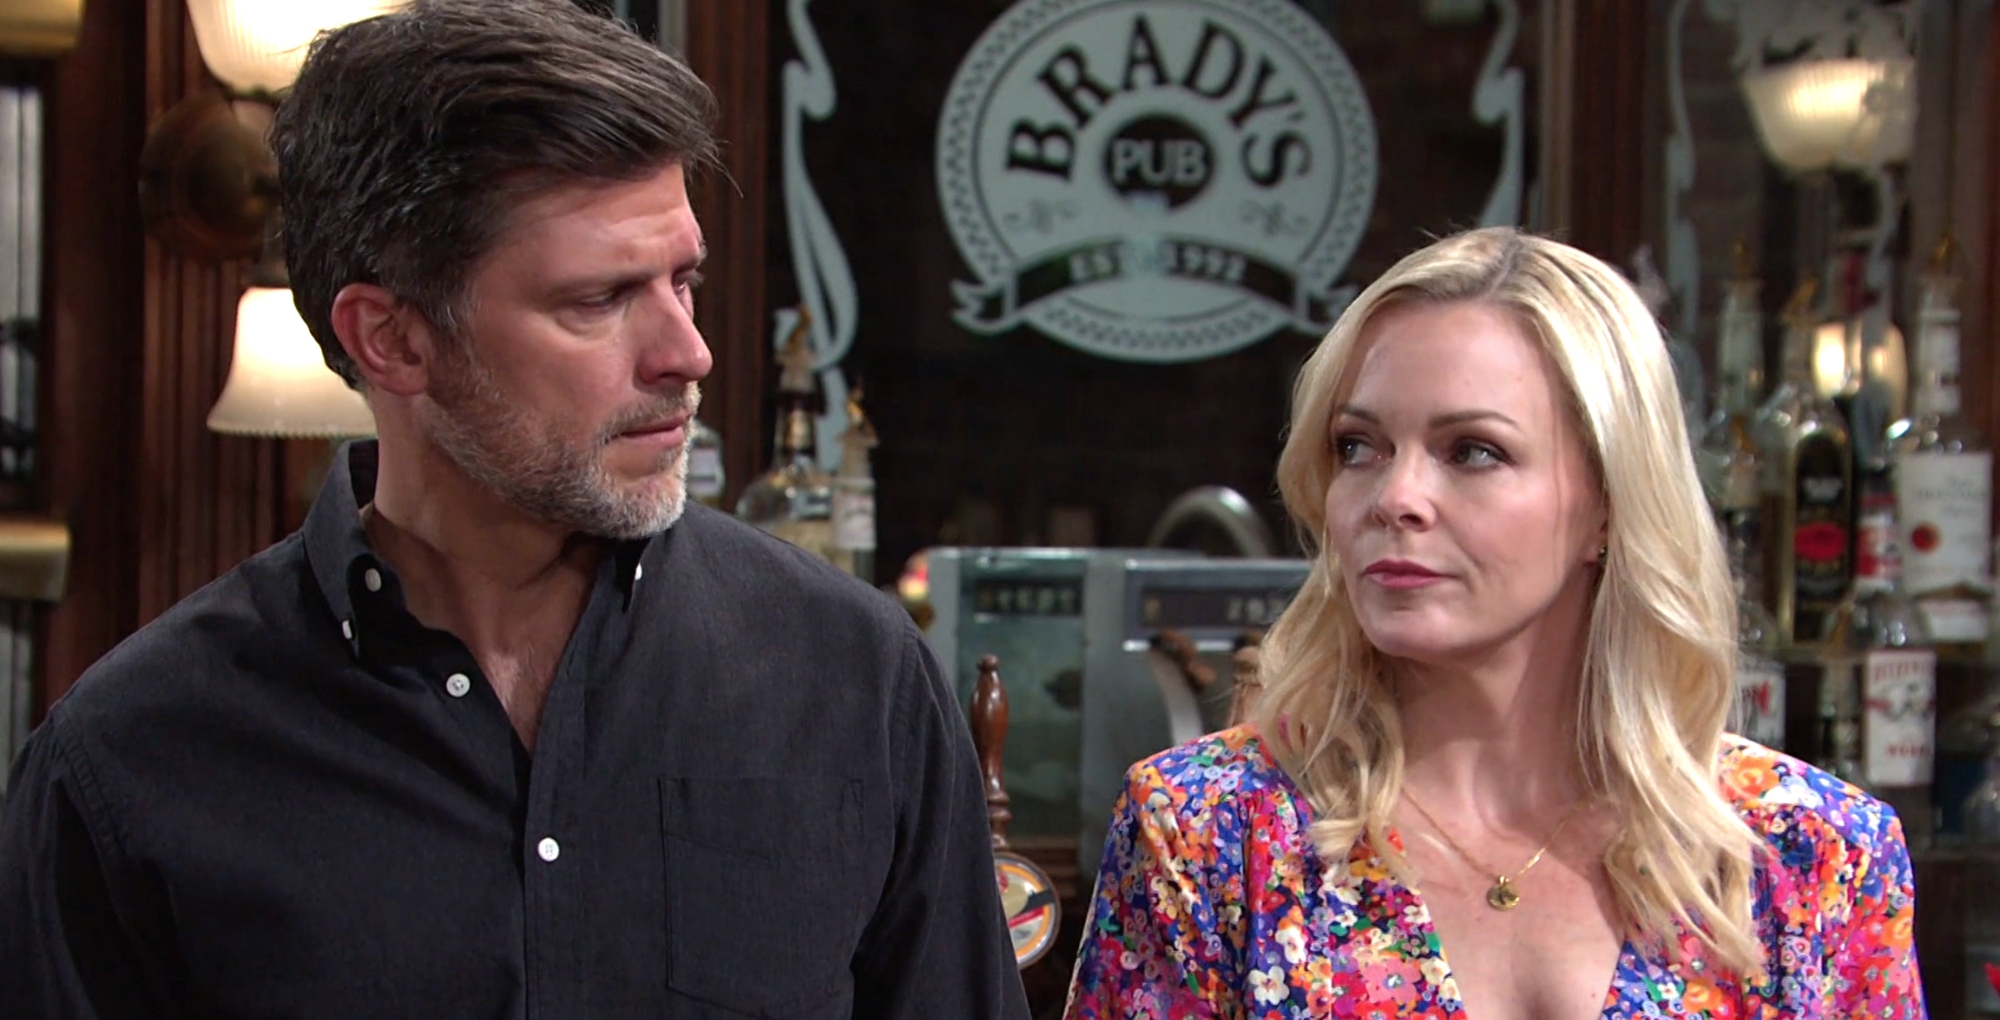 belle brady and shawn brady on days of our lives.